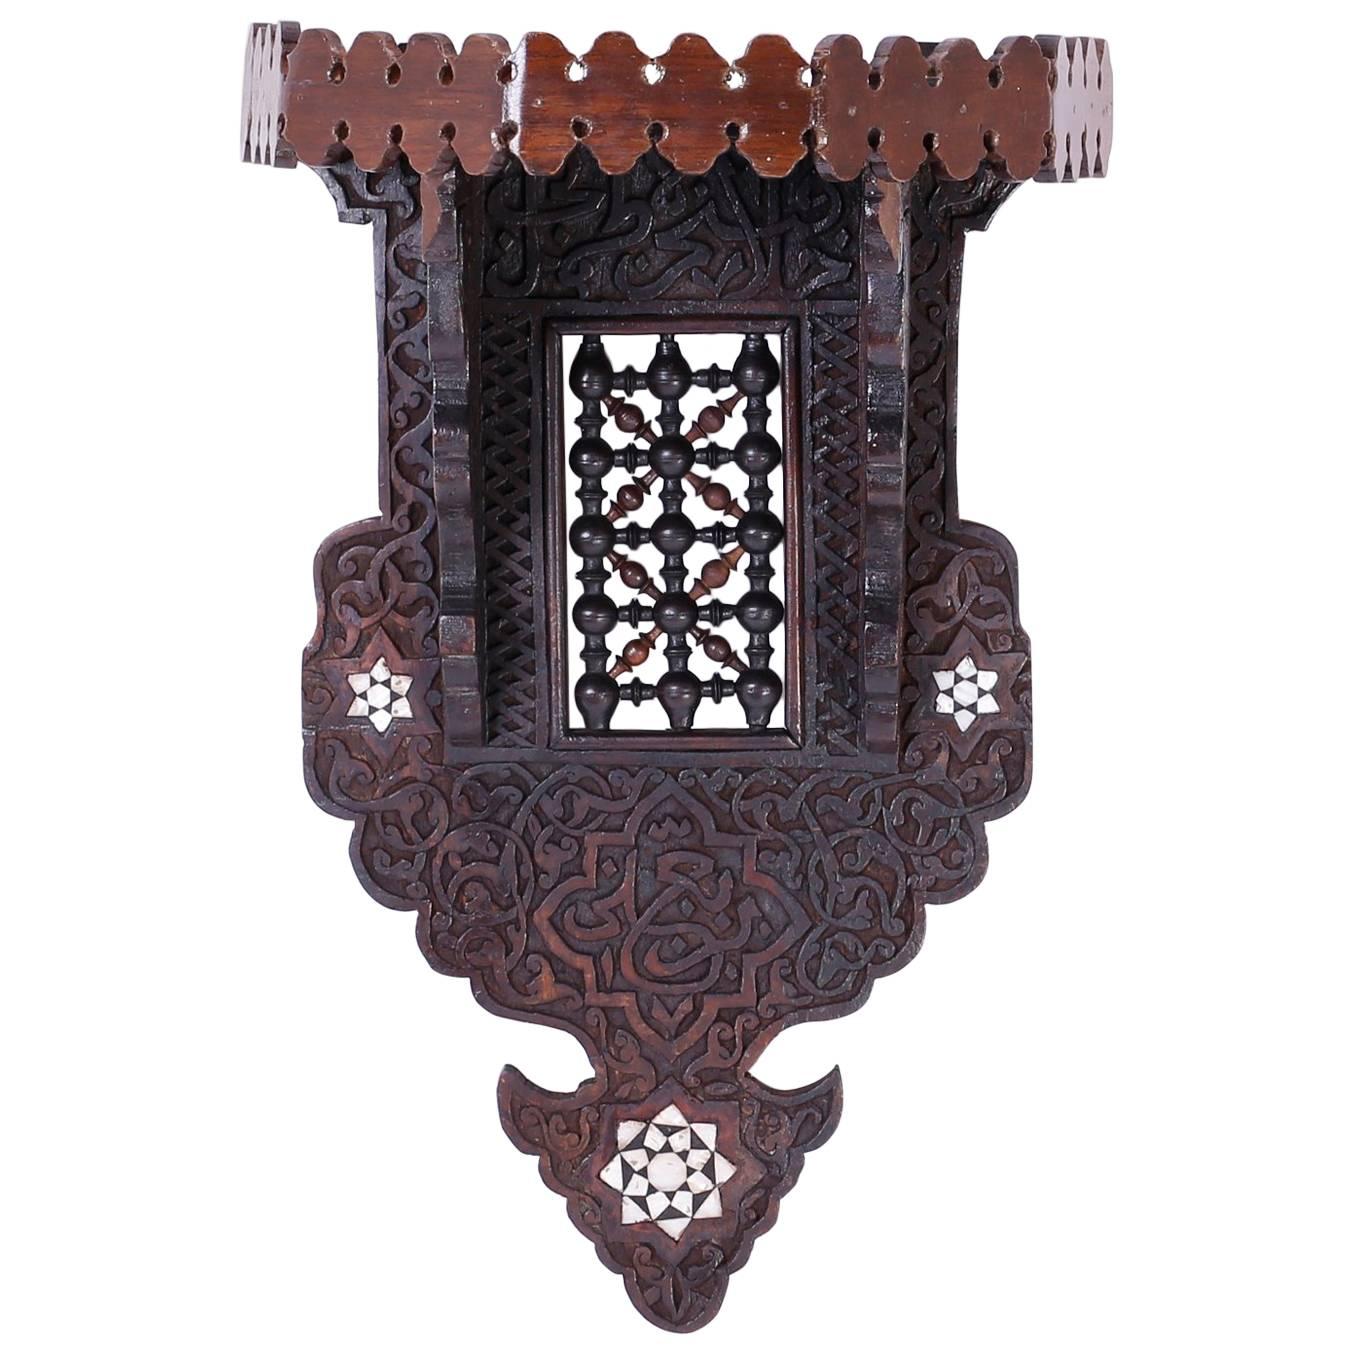 Exotic British Colonial Wall Bracket Inlaid with Mother-of-Pearl